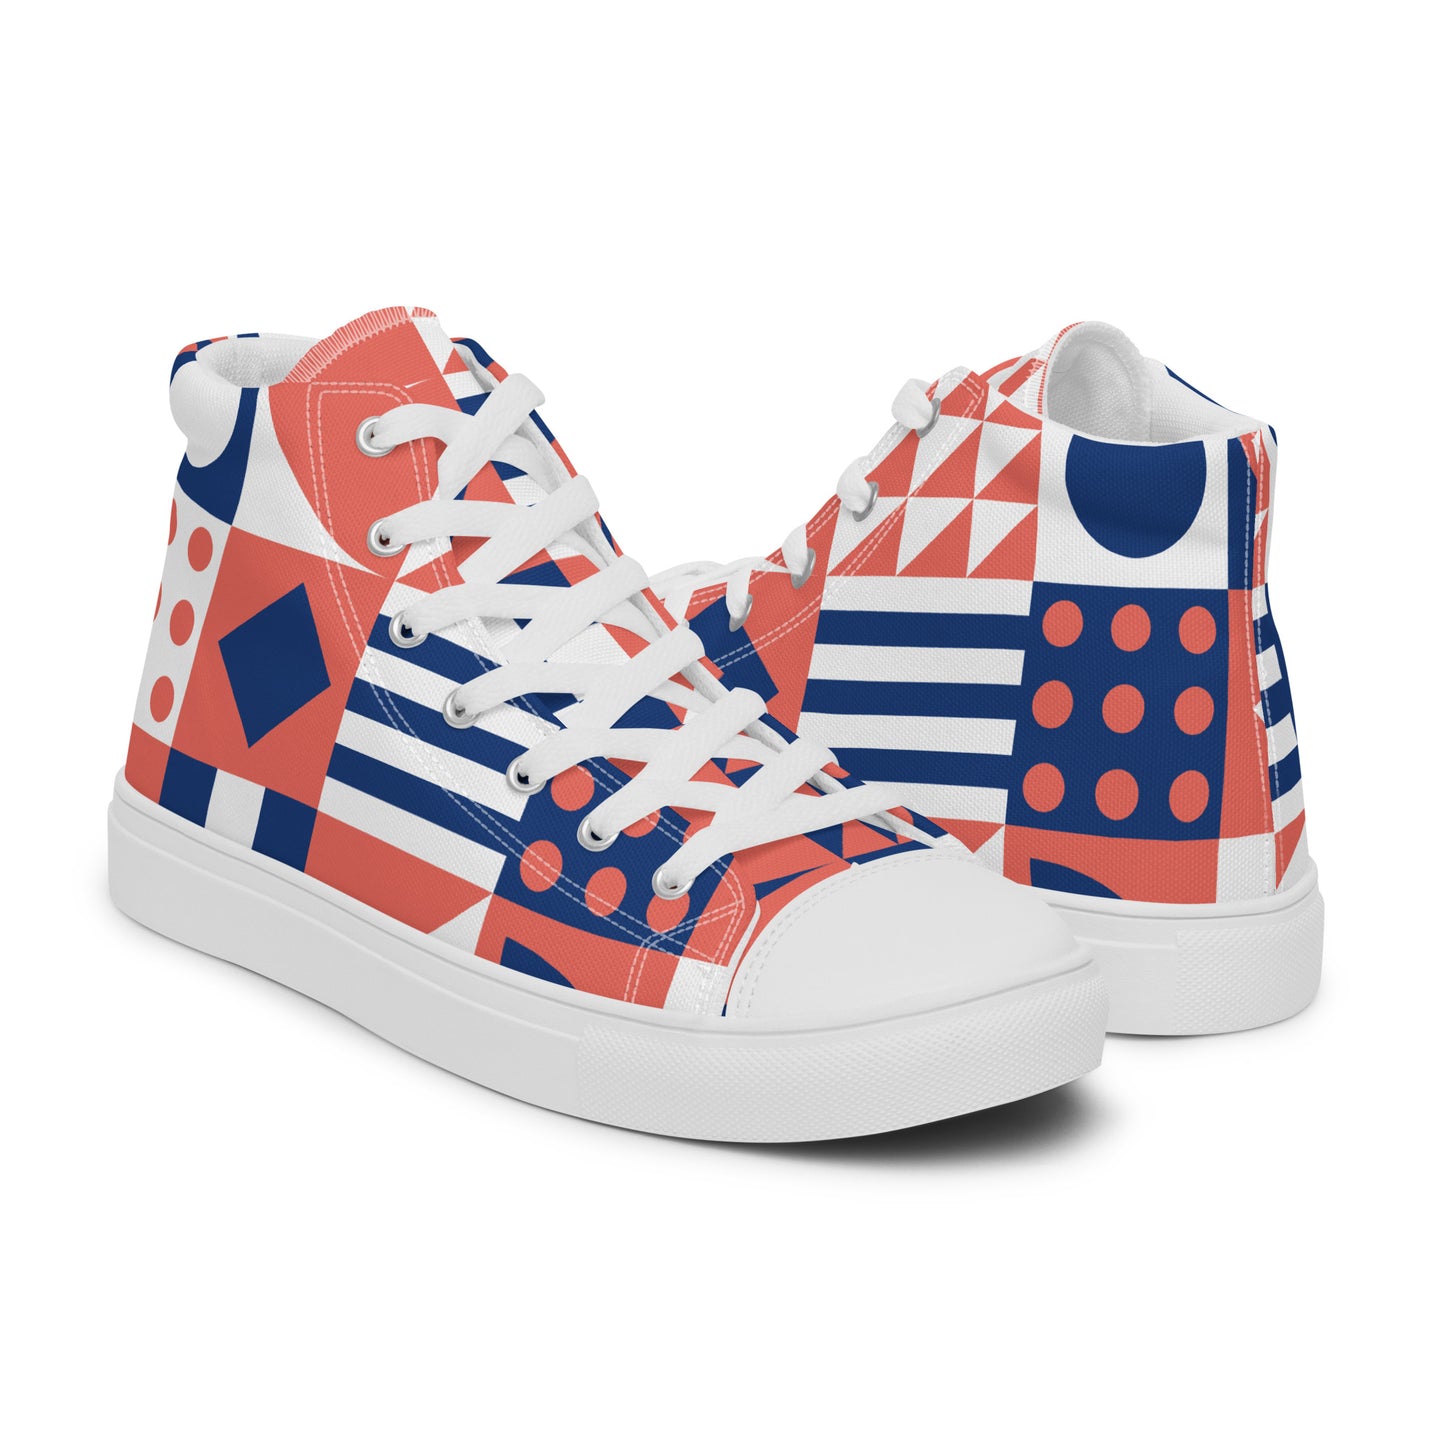 Women’s Patterns high top canvas shoes